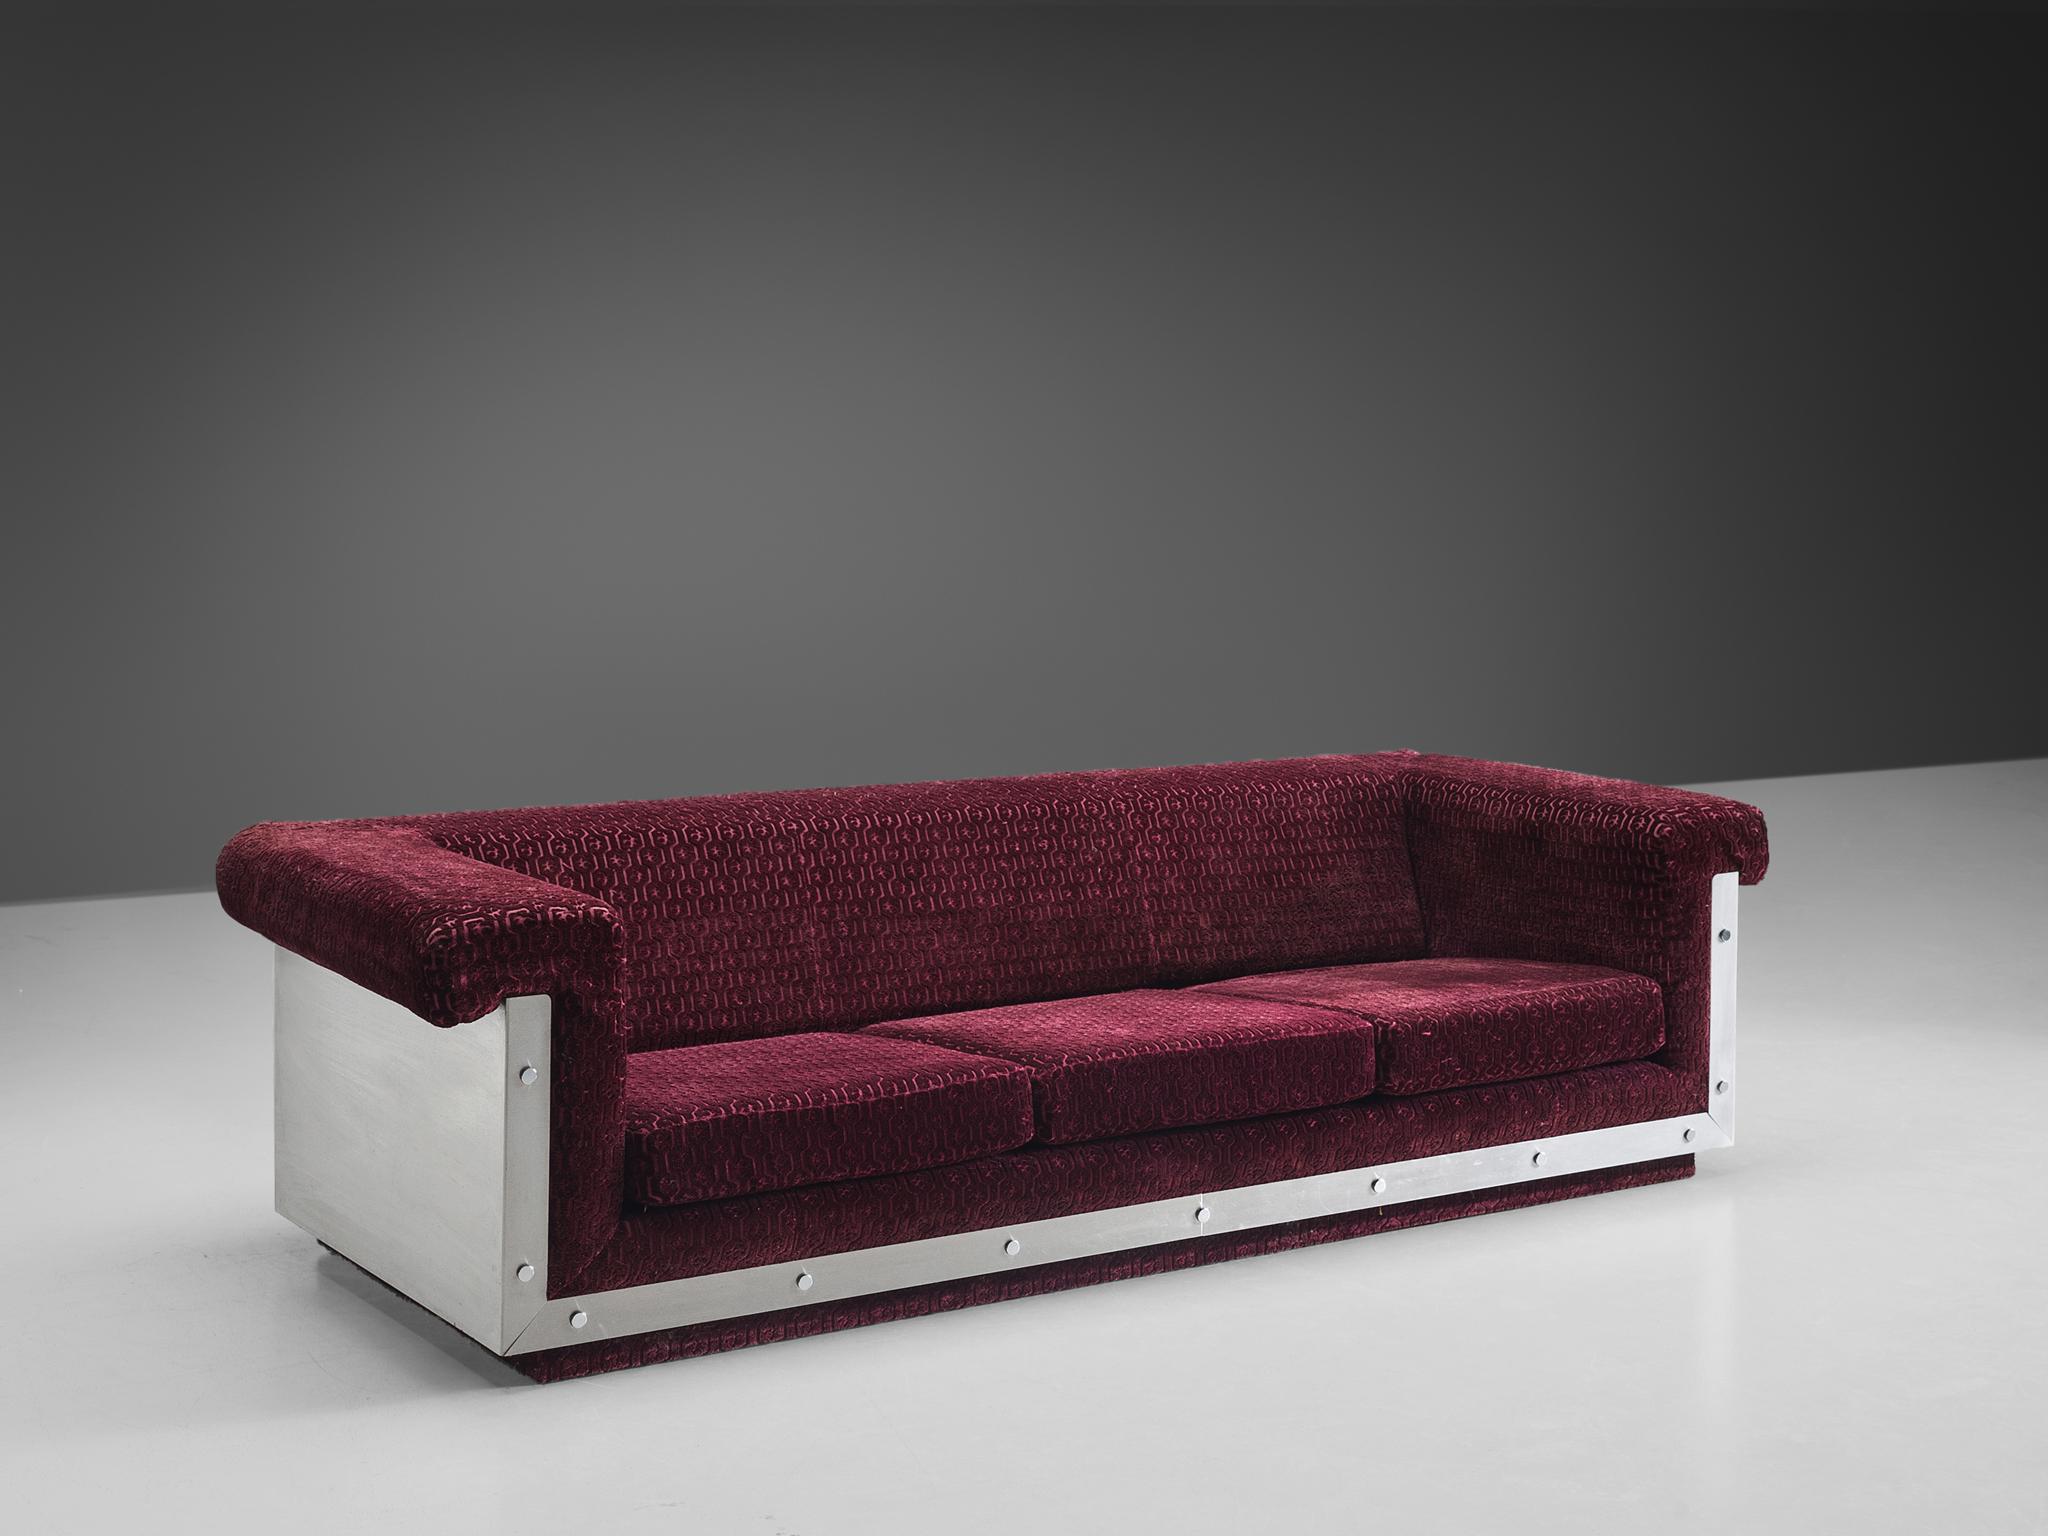 Sofa, stainless steel, velvet, France, late 1960s

Modern and sleek sofa in stainless steel and velvet patterned upholstery. This sofa has a very strong expression mostly created by the shimmering steel case. This base holds the cushions,